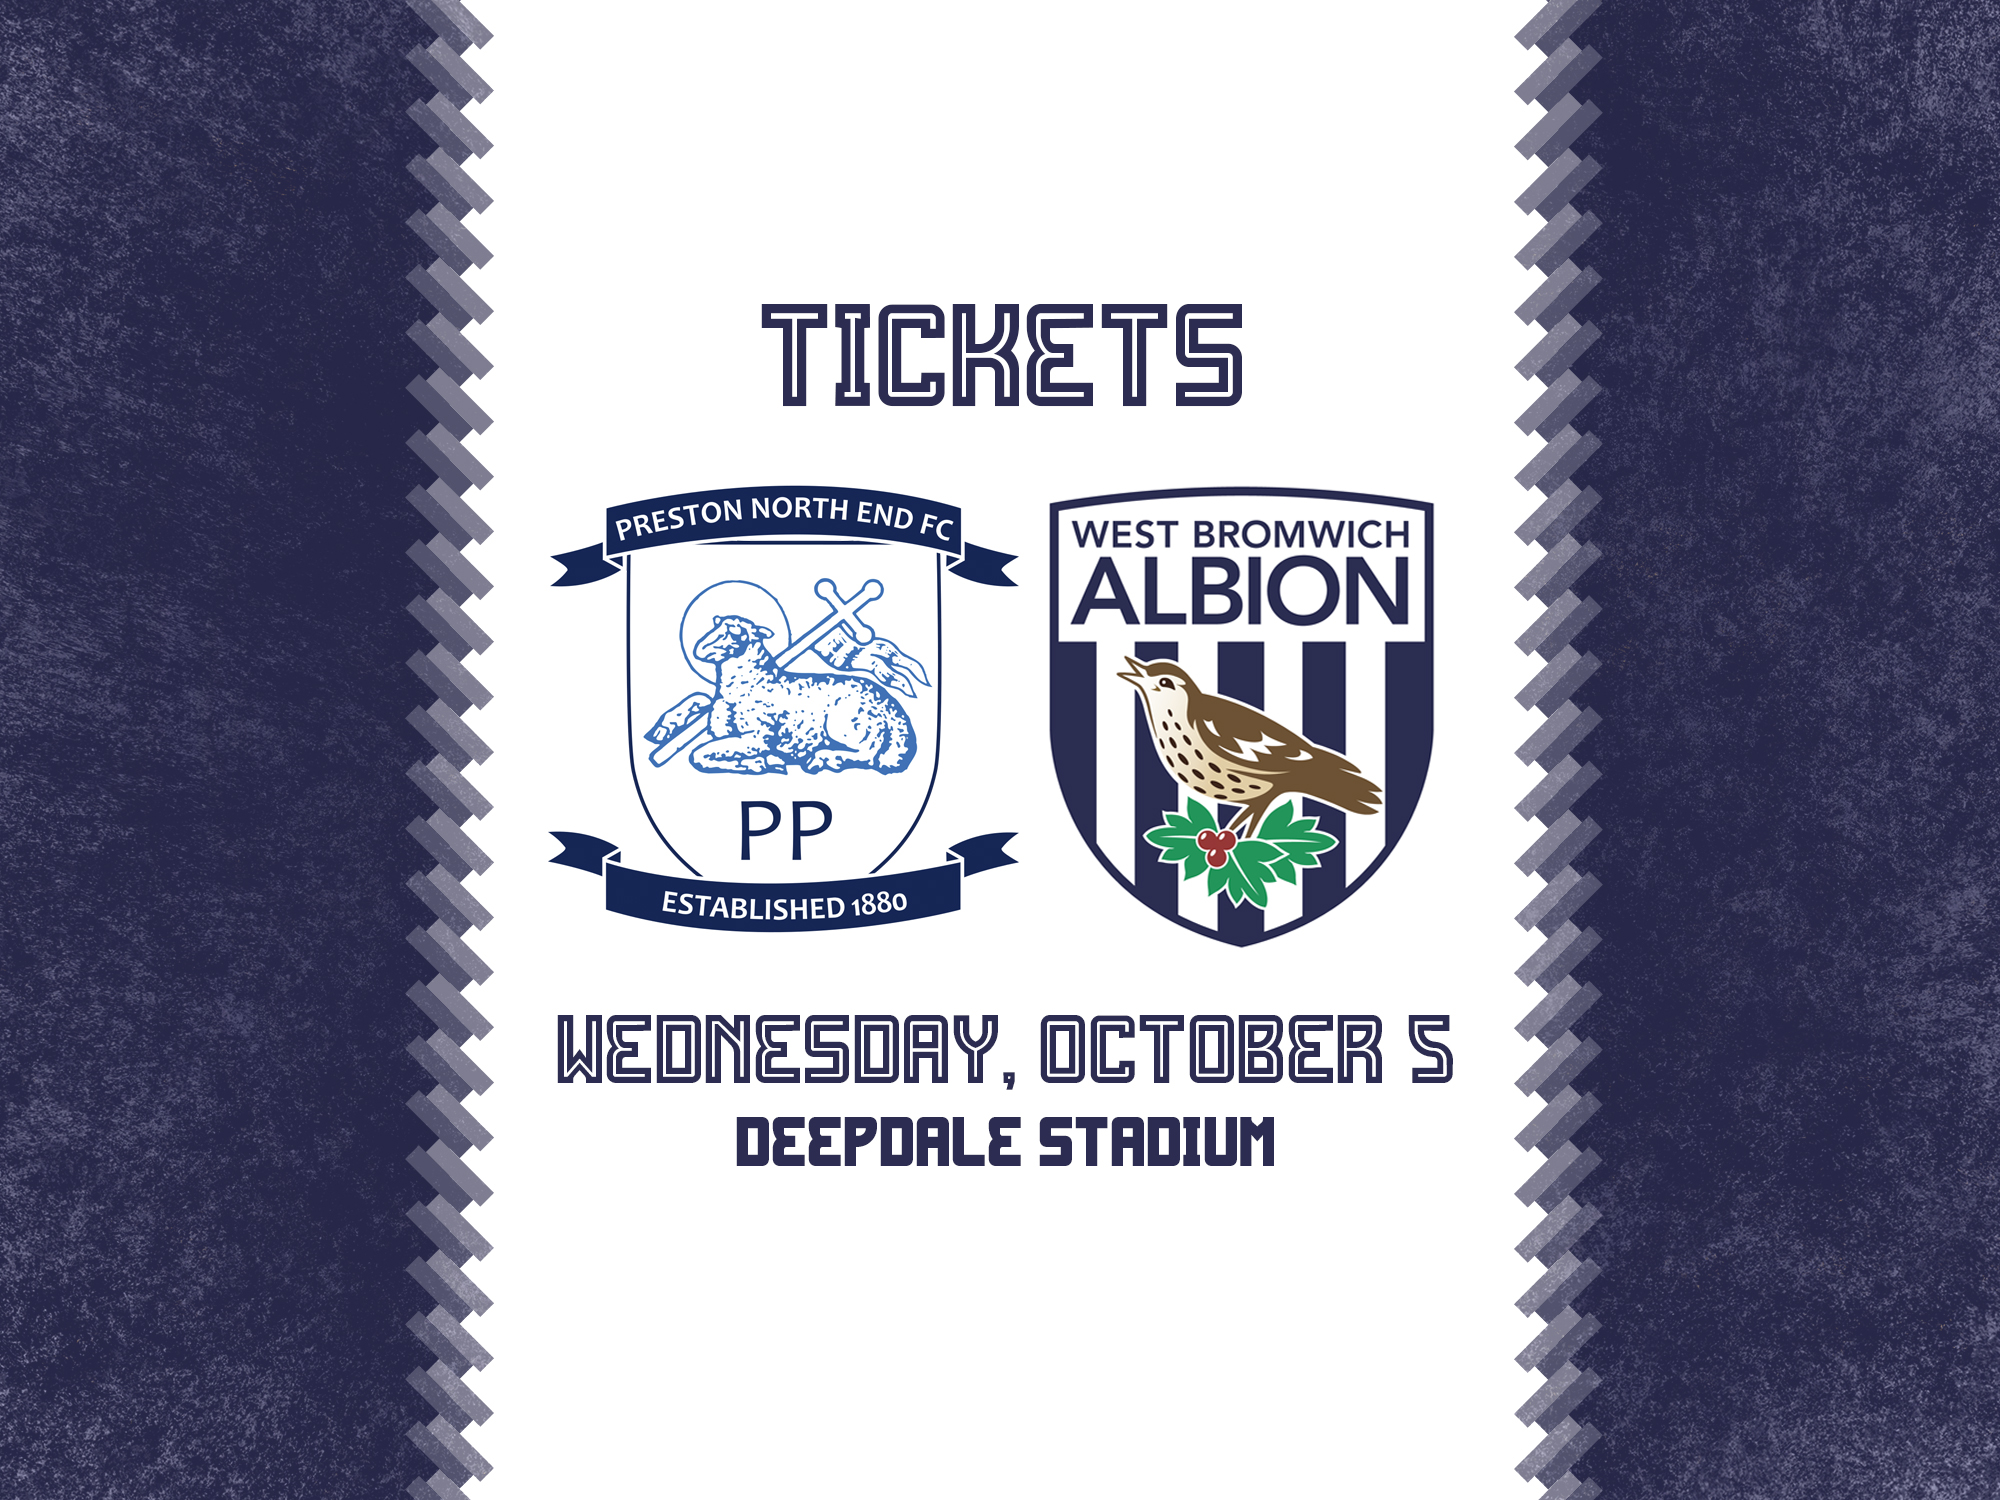 Tickets are now on sale for Albion's trip to Preston